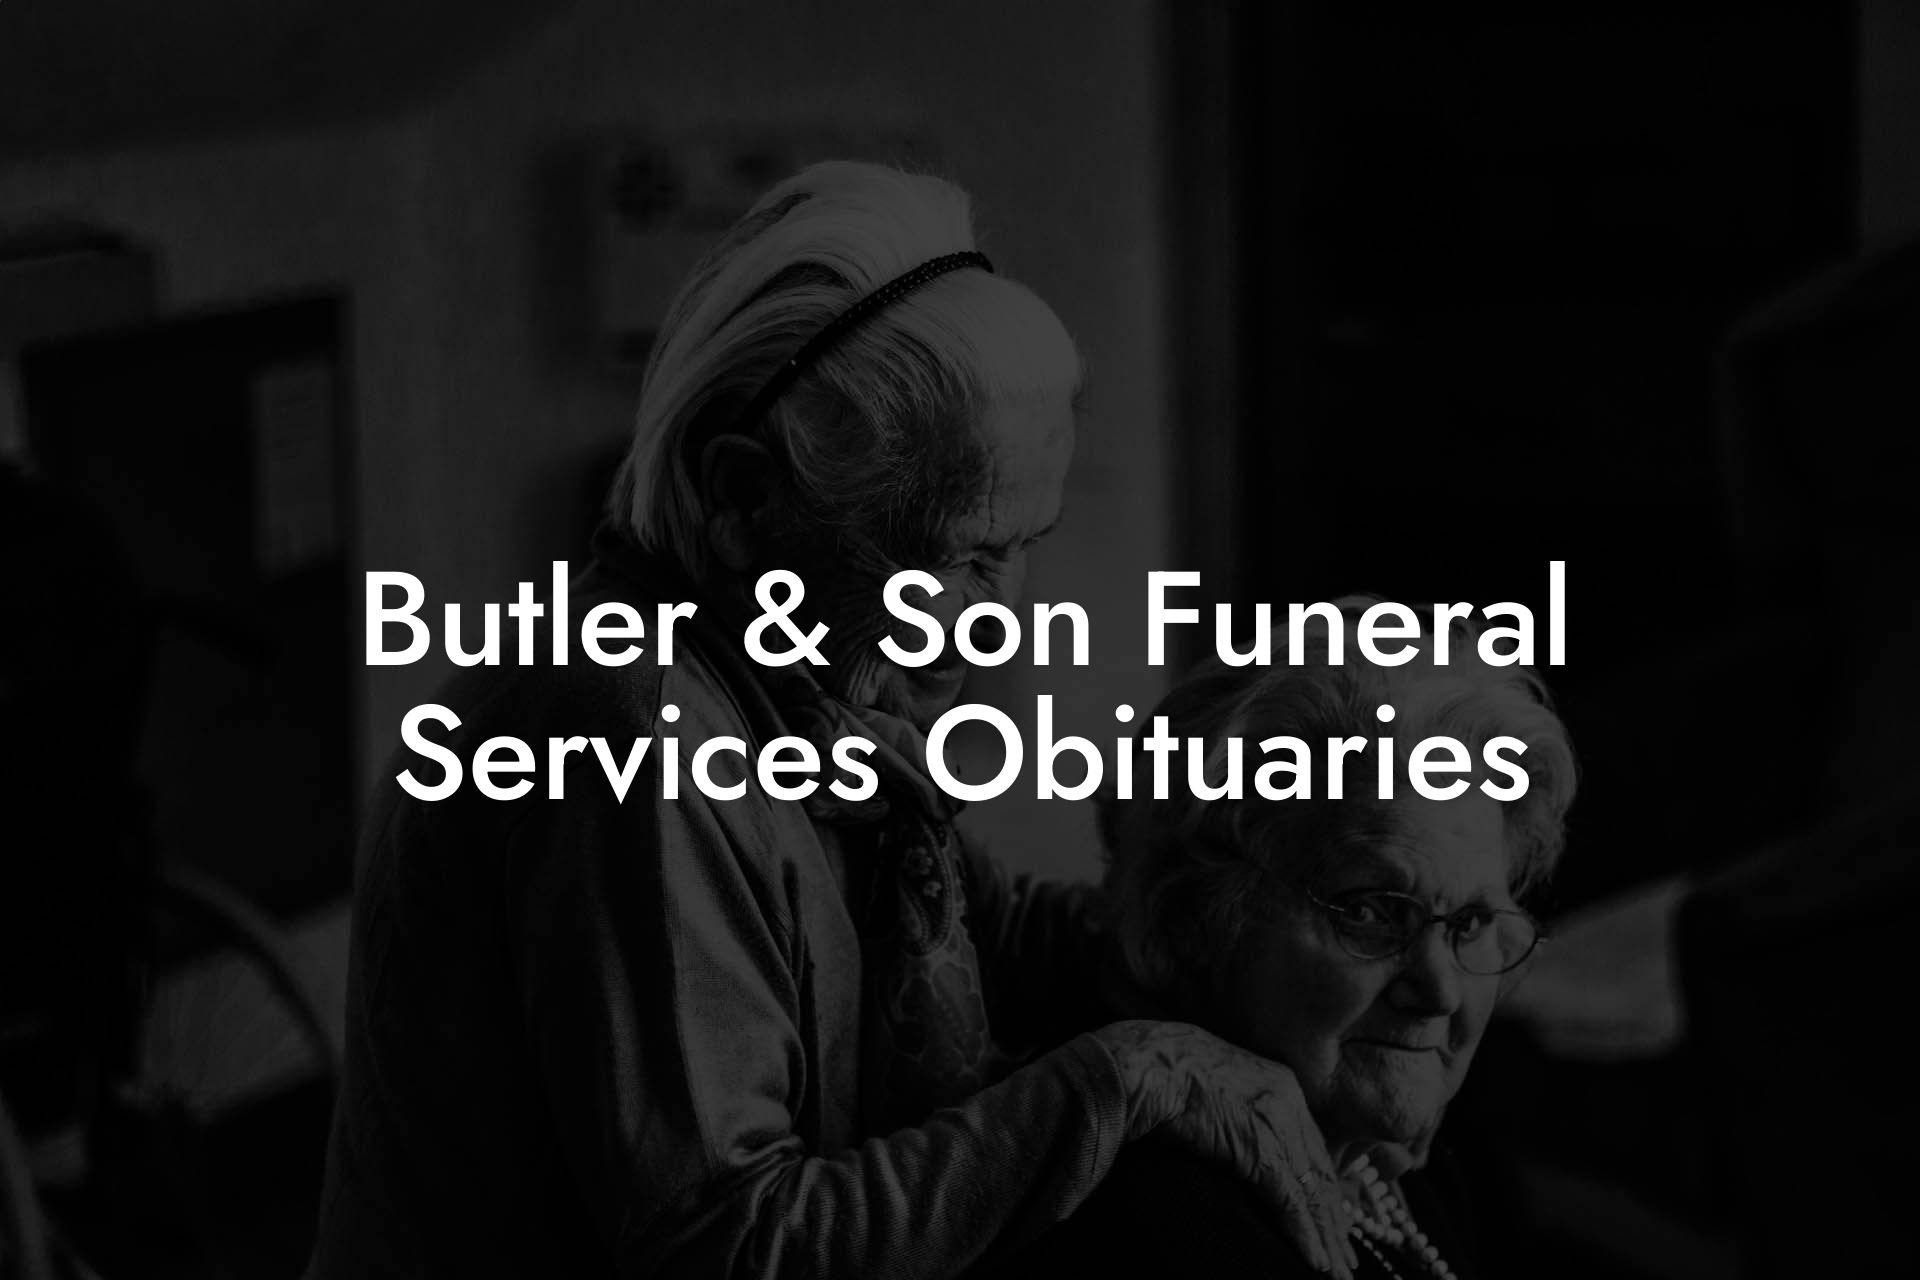 Butler & Son Funeral Services Obituaries